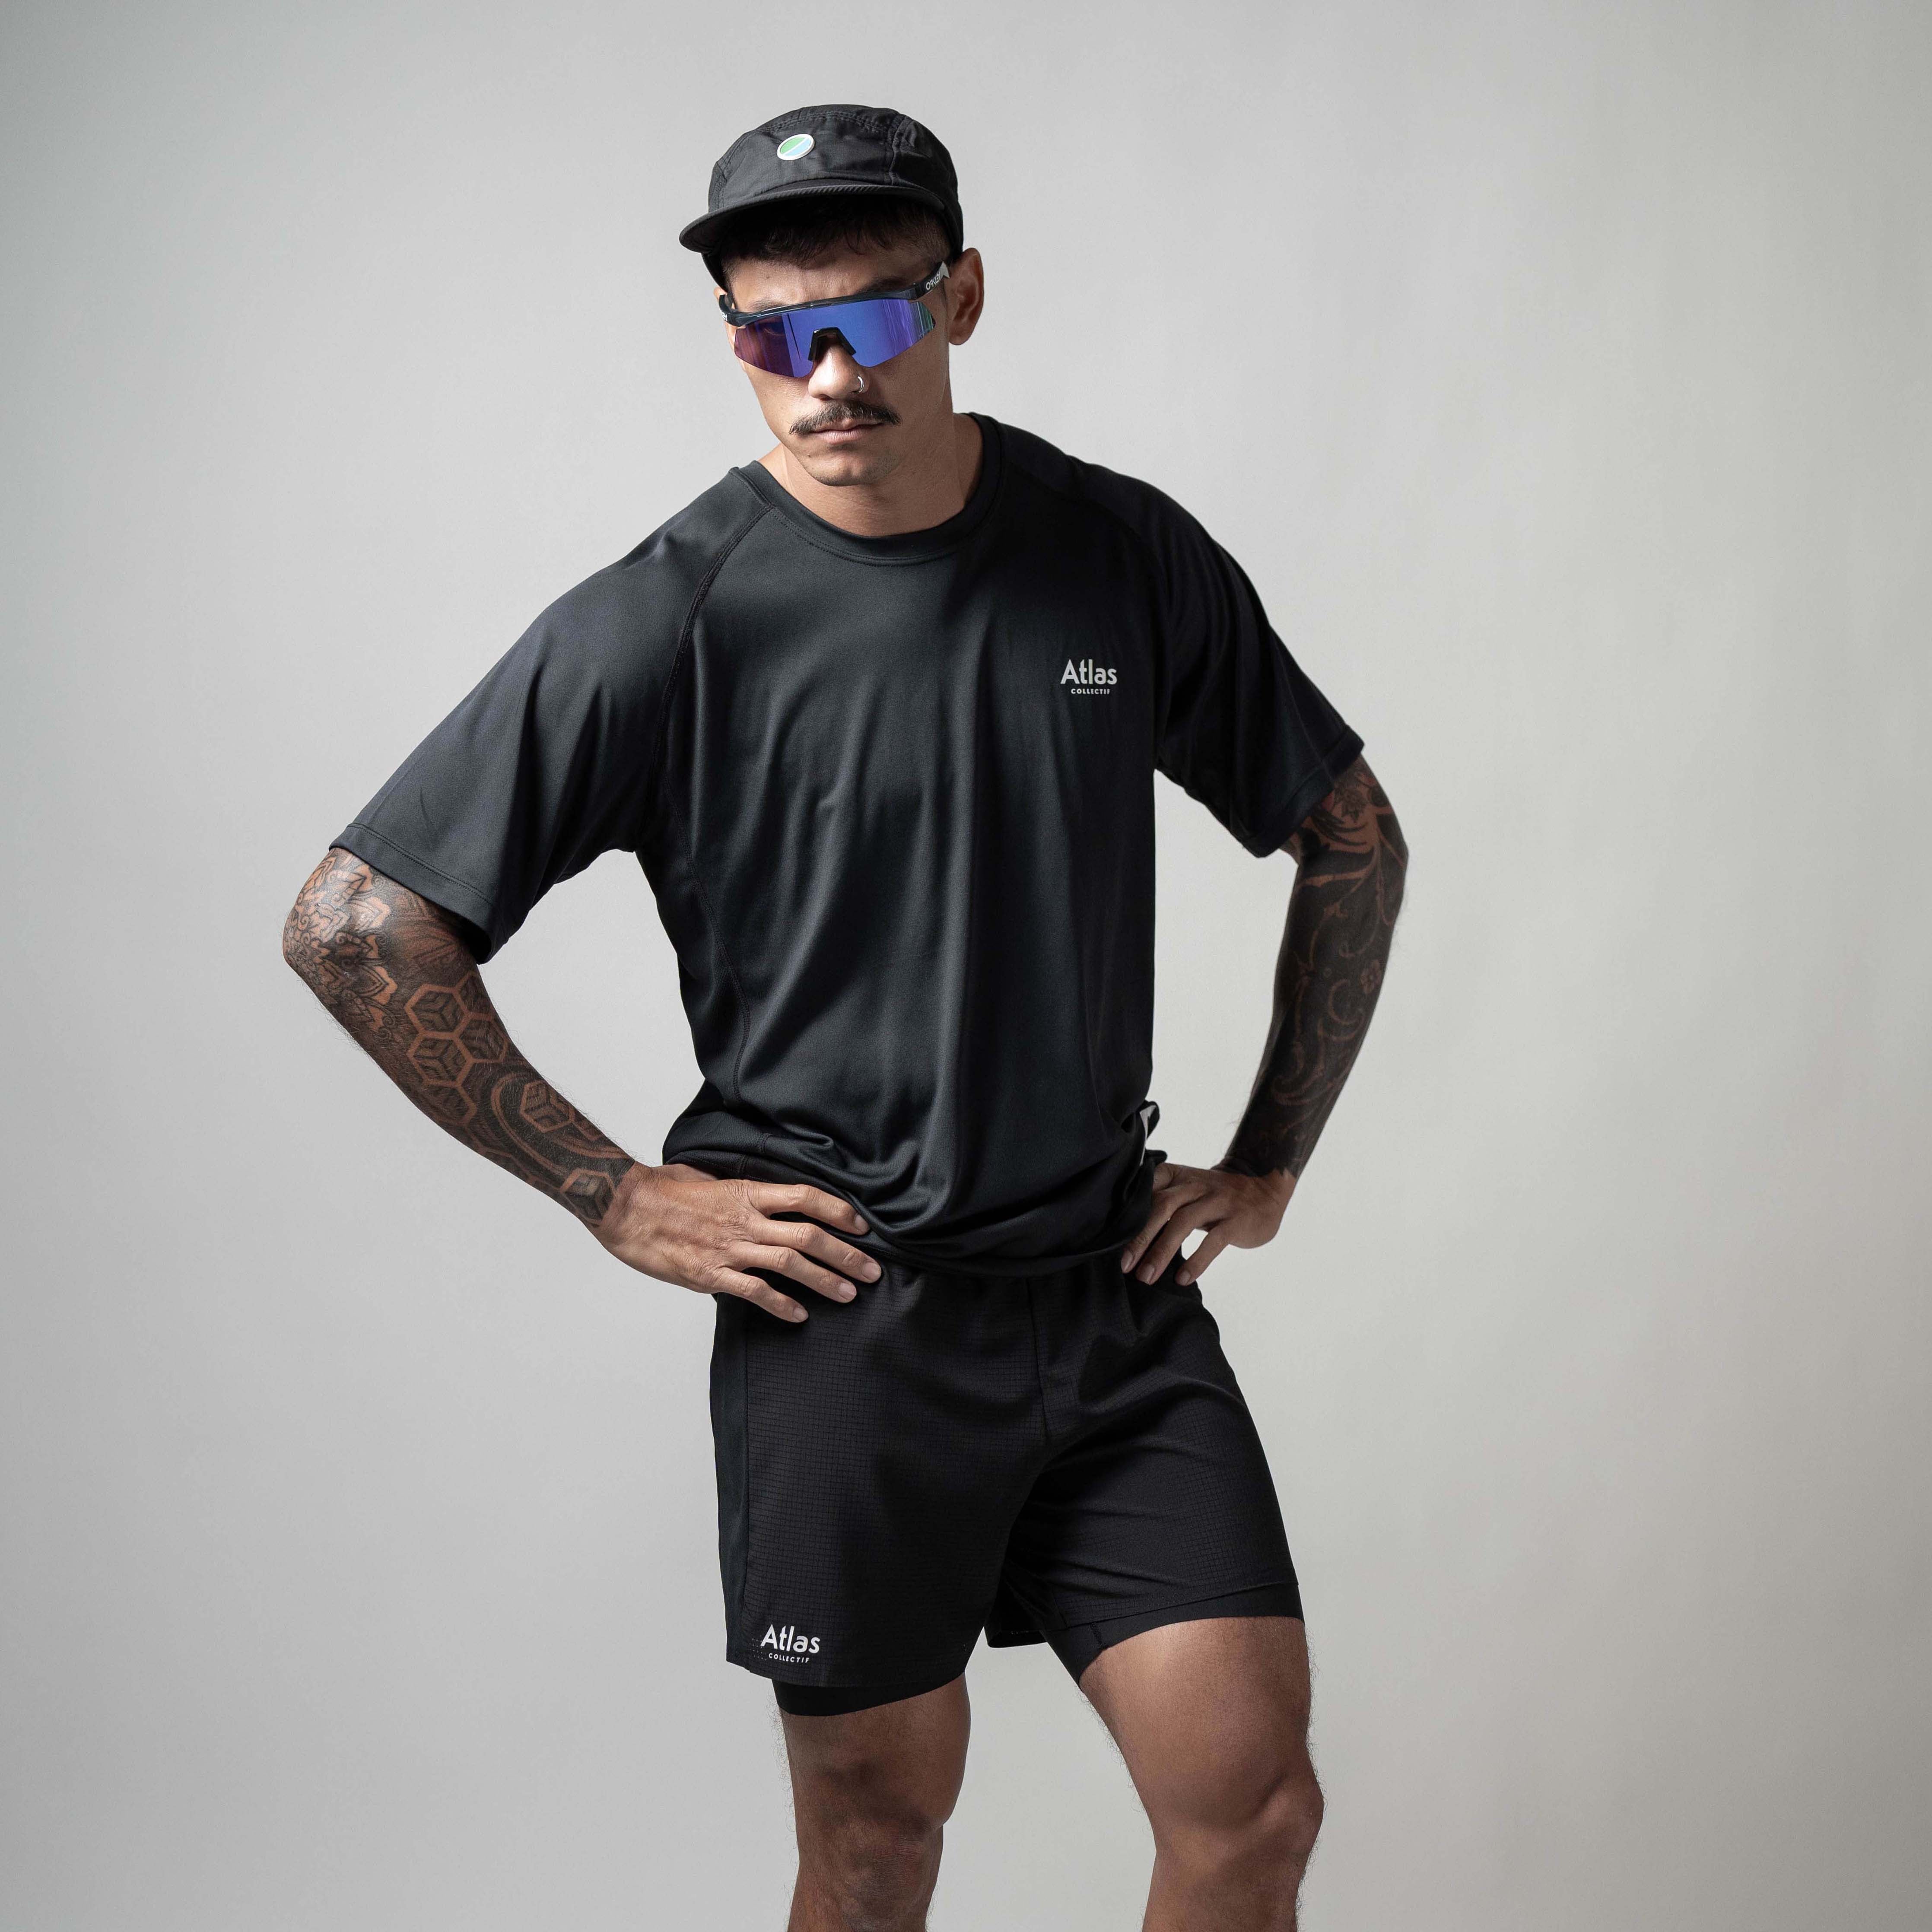 Running Shorts Collectif Atlas 1 Black 2 Core - in